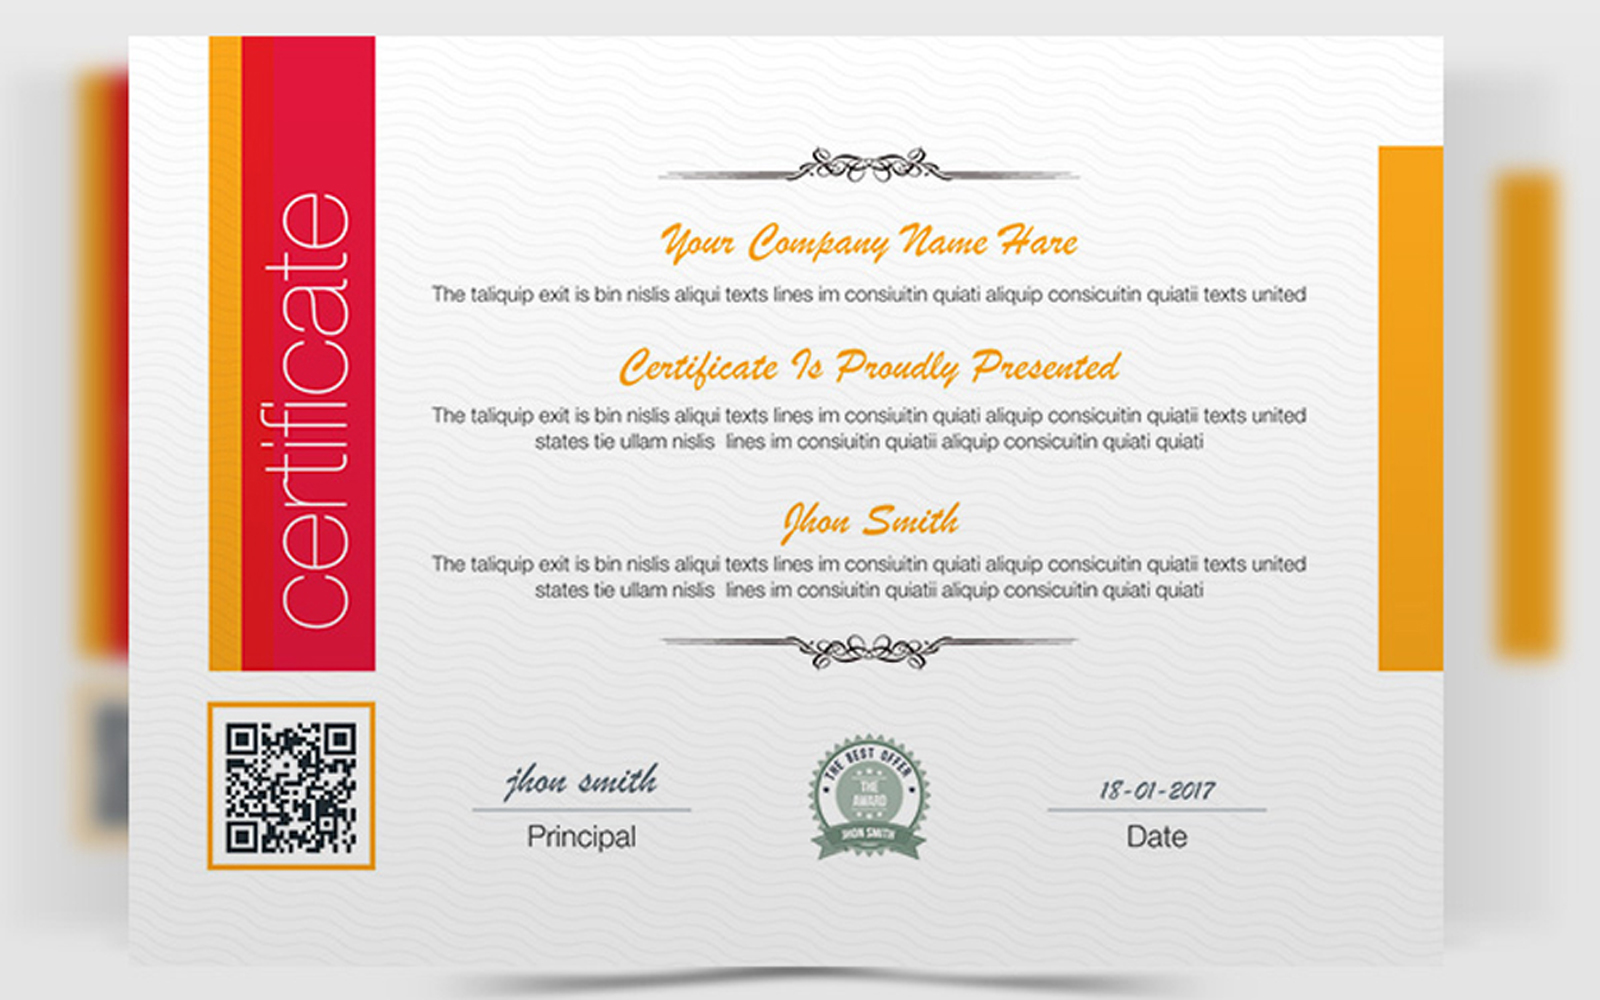 Template #101361 Achievement Awarded Webdesign Template - Logo template Preview